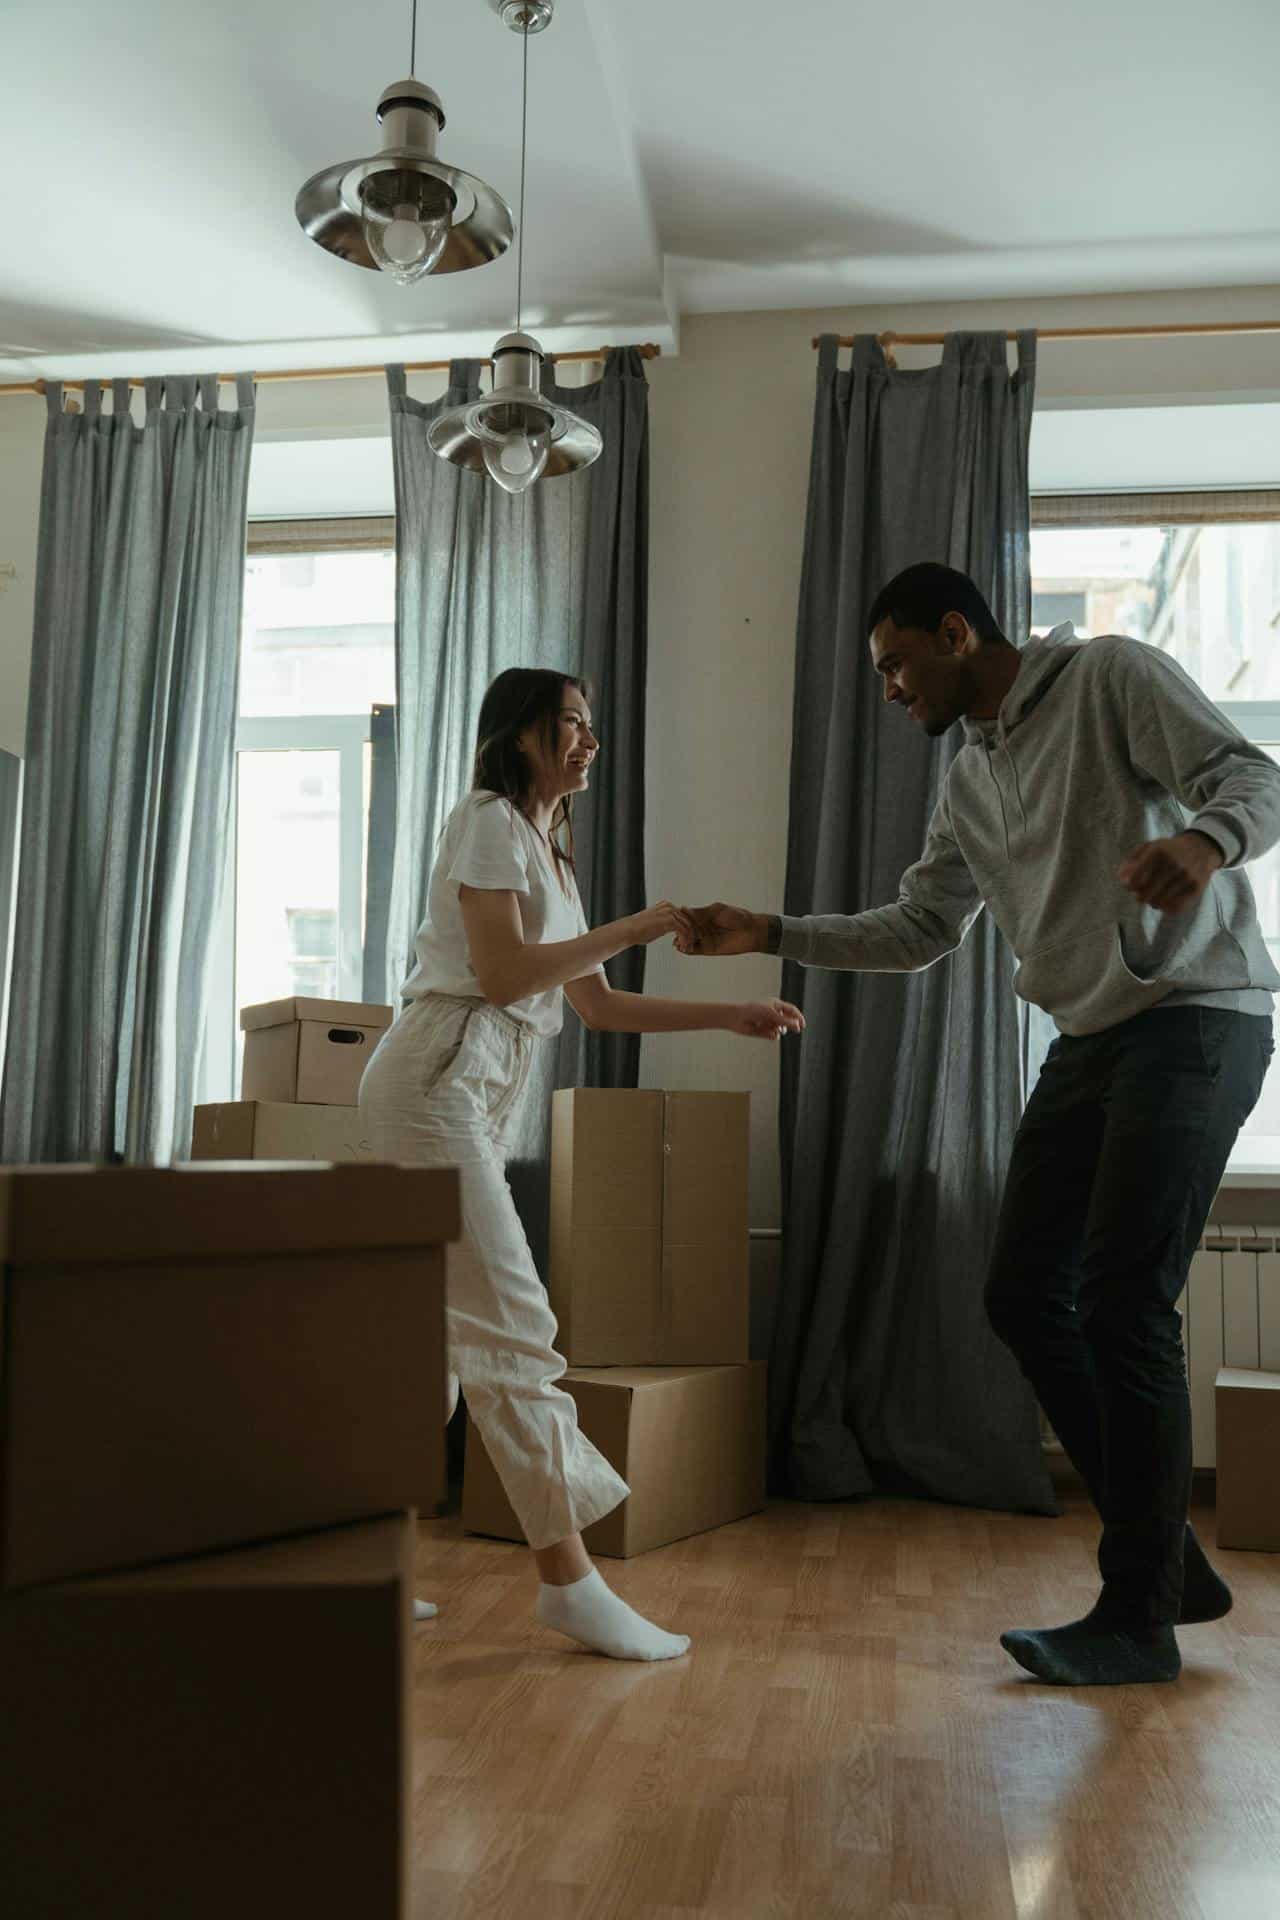 A couple dancing together in their living room. They are dressed in sweats and surrounded by boxes, as though they are in the process of moving into a new apartment. 